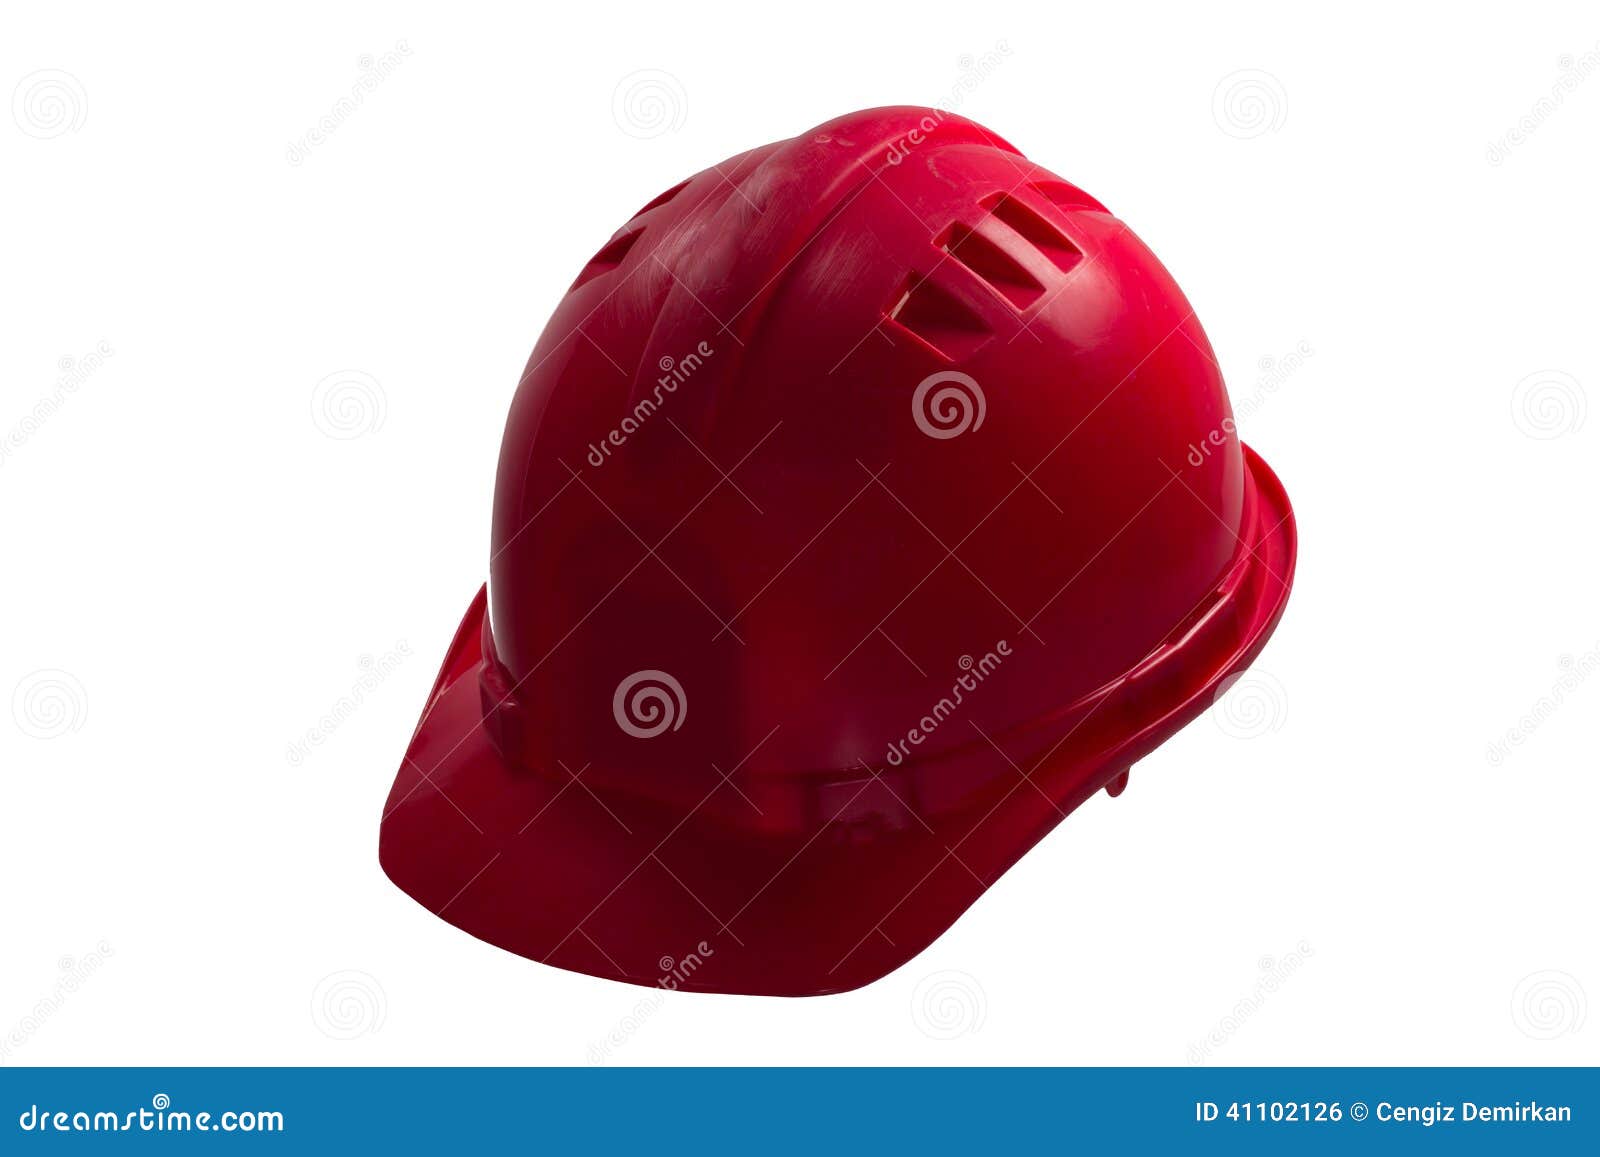 red hard hat clipart - photo #25